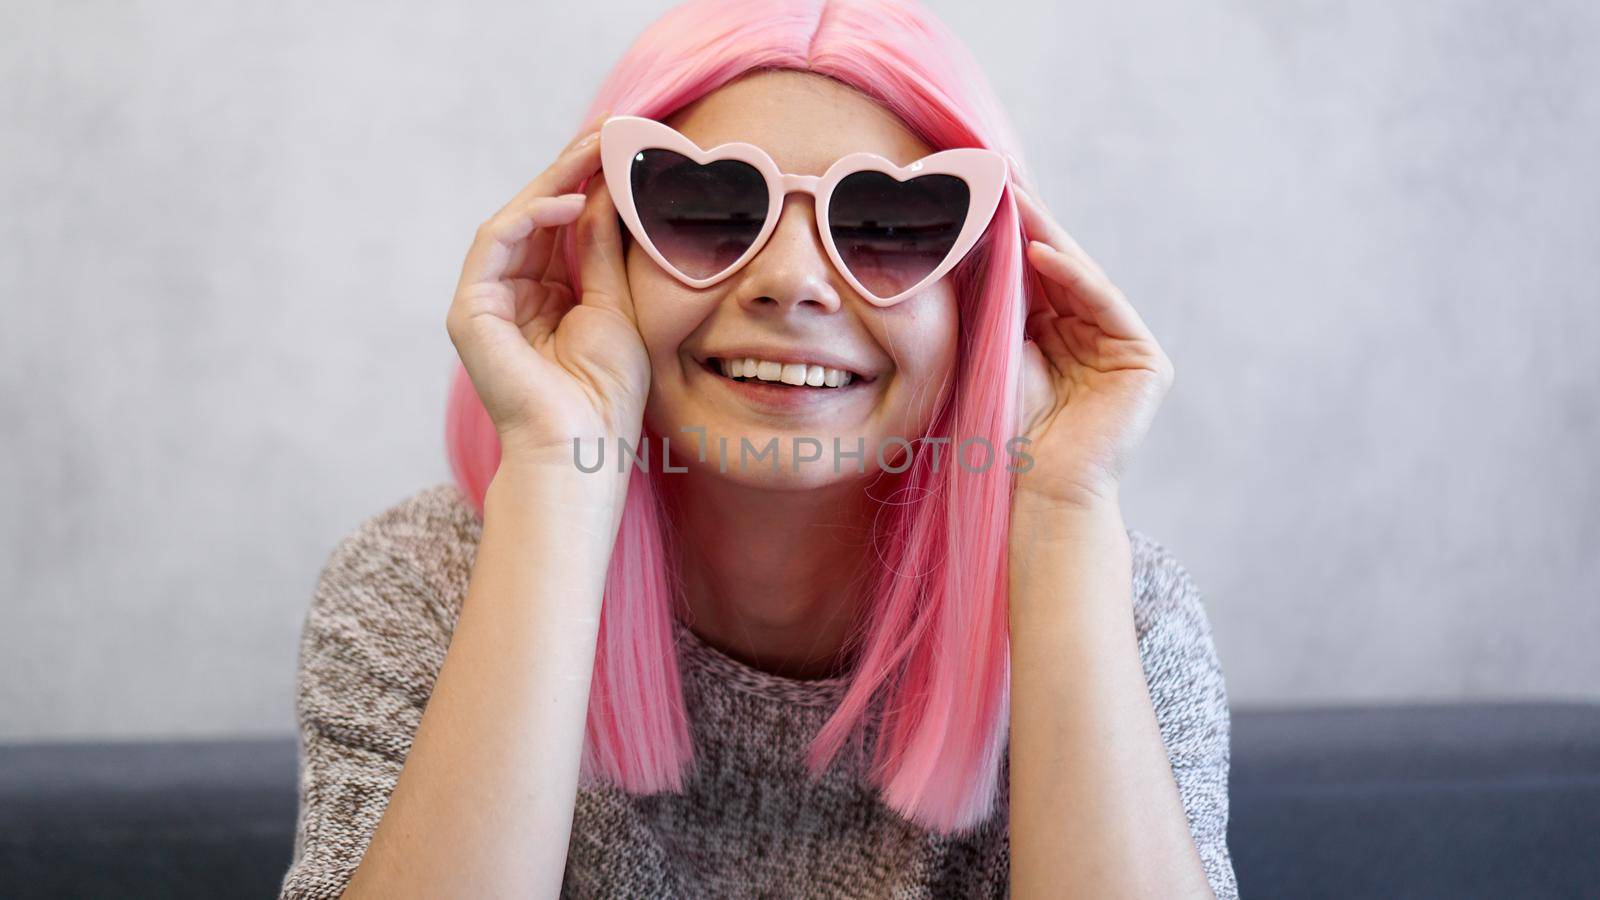 Woman wearing heart-shaped glasses and pink wig - positive portrait